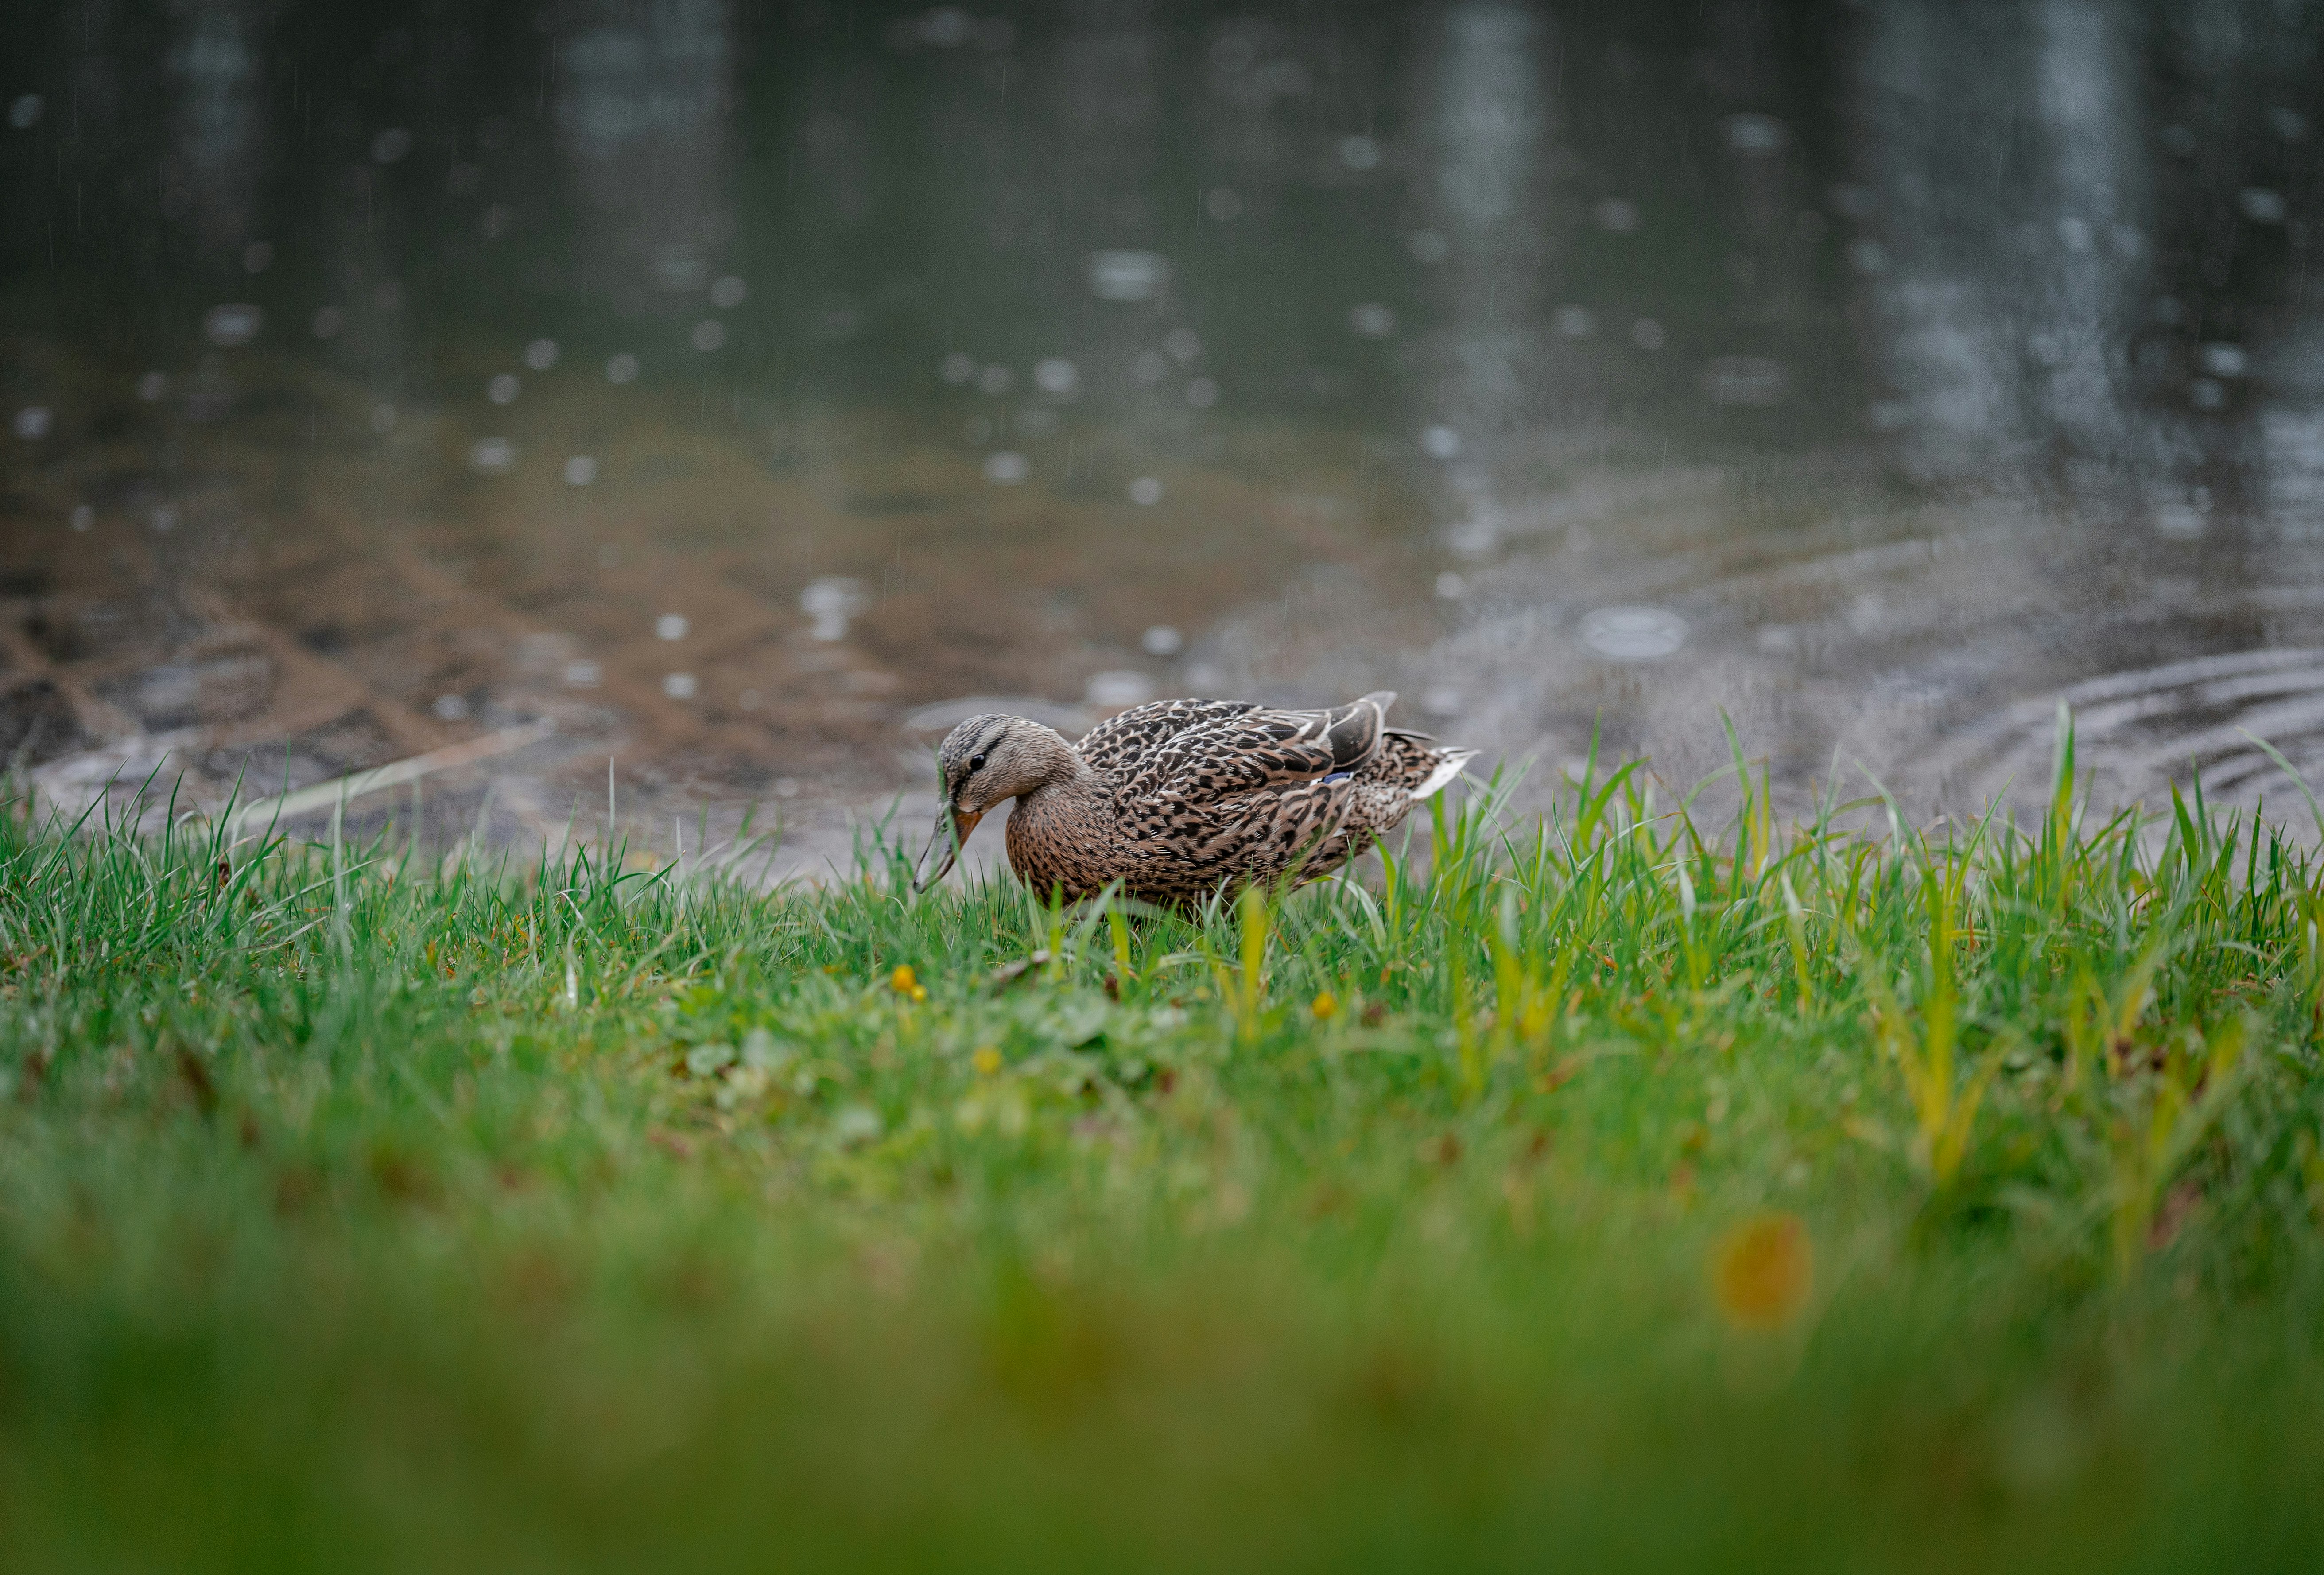 brown duck on green grass field near body of water during daytime